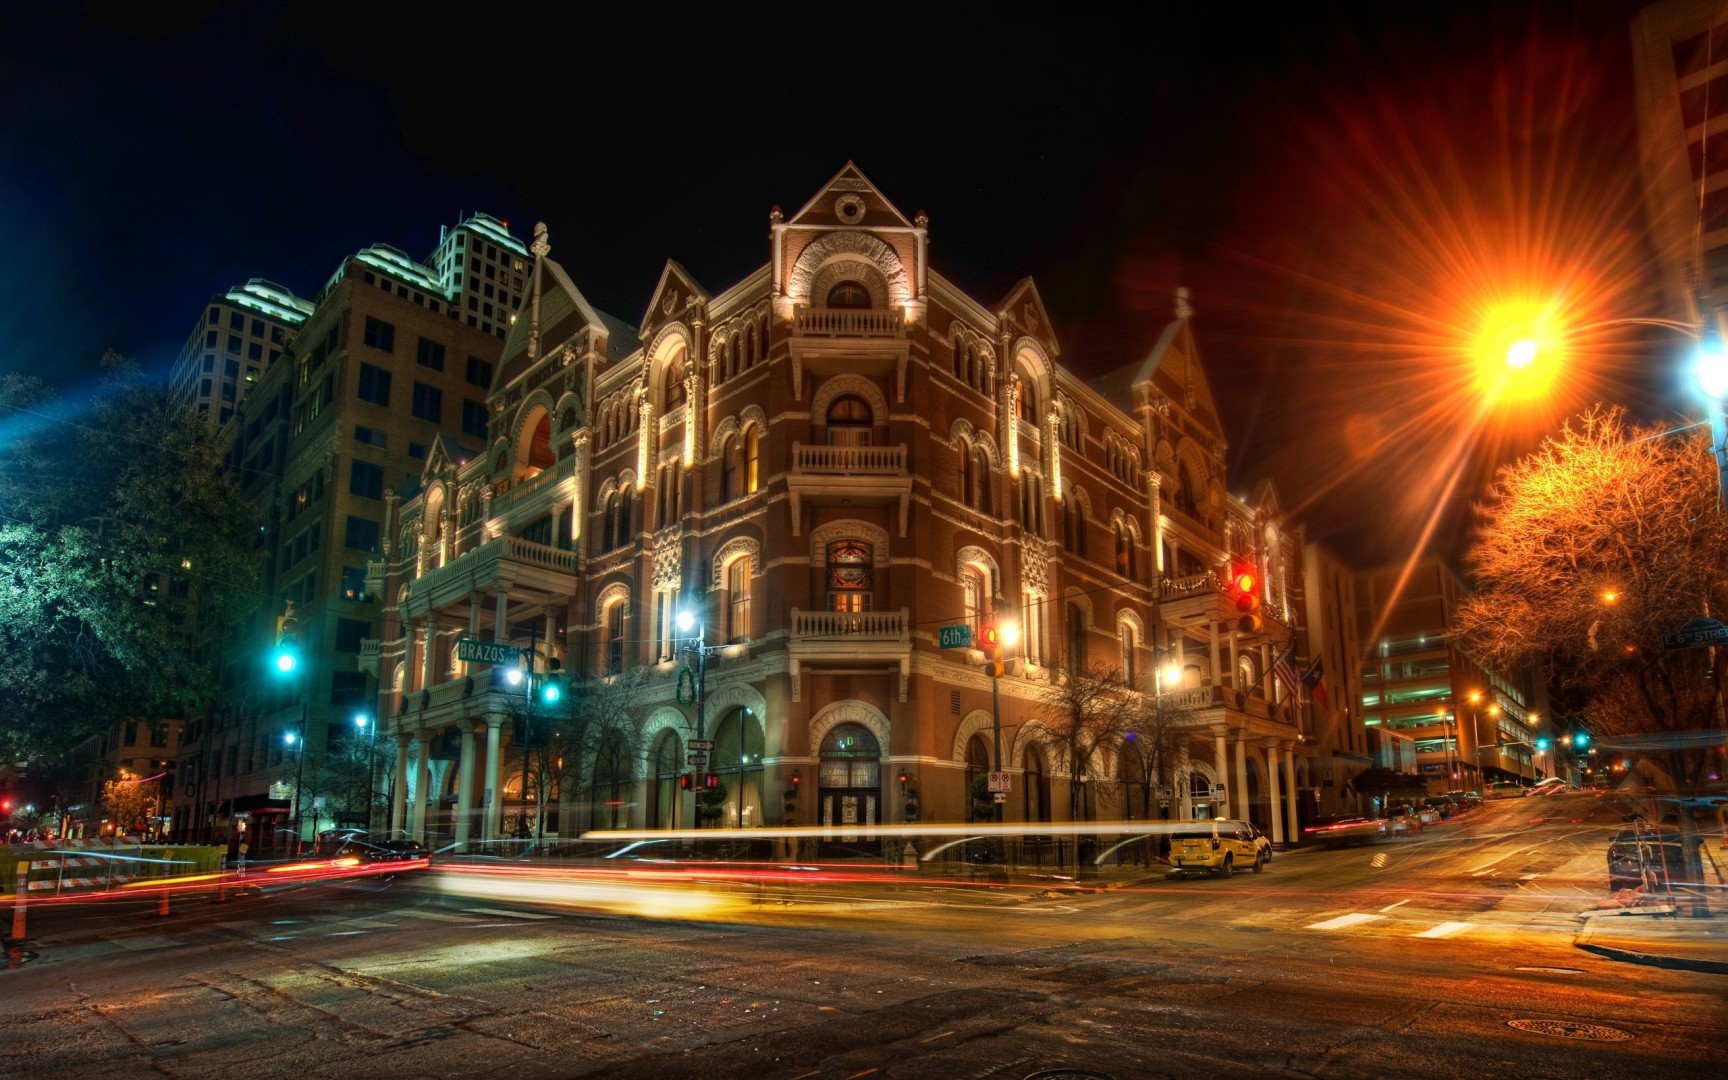 The Driskill at Night. Austin, Texas USA Wallpaper and Background Image